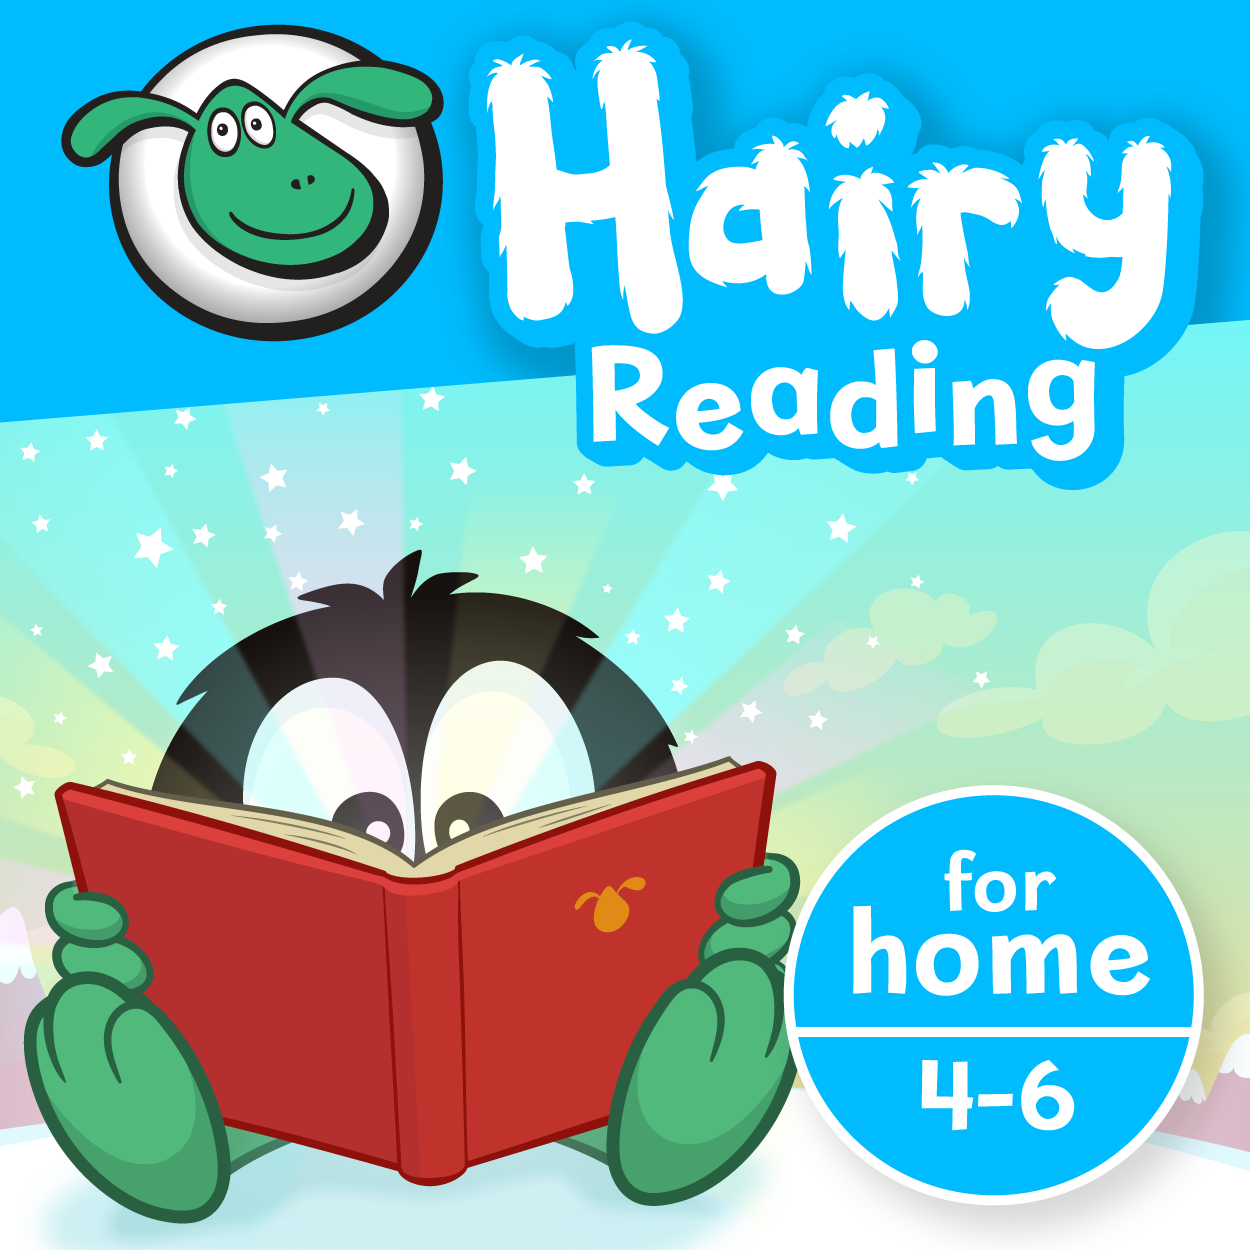 Hairy Reading for home